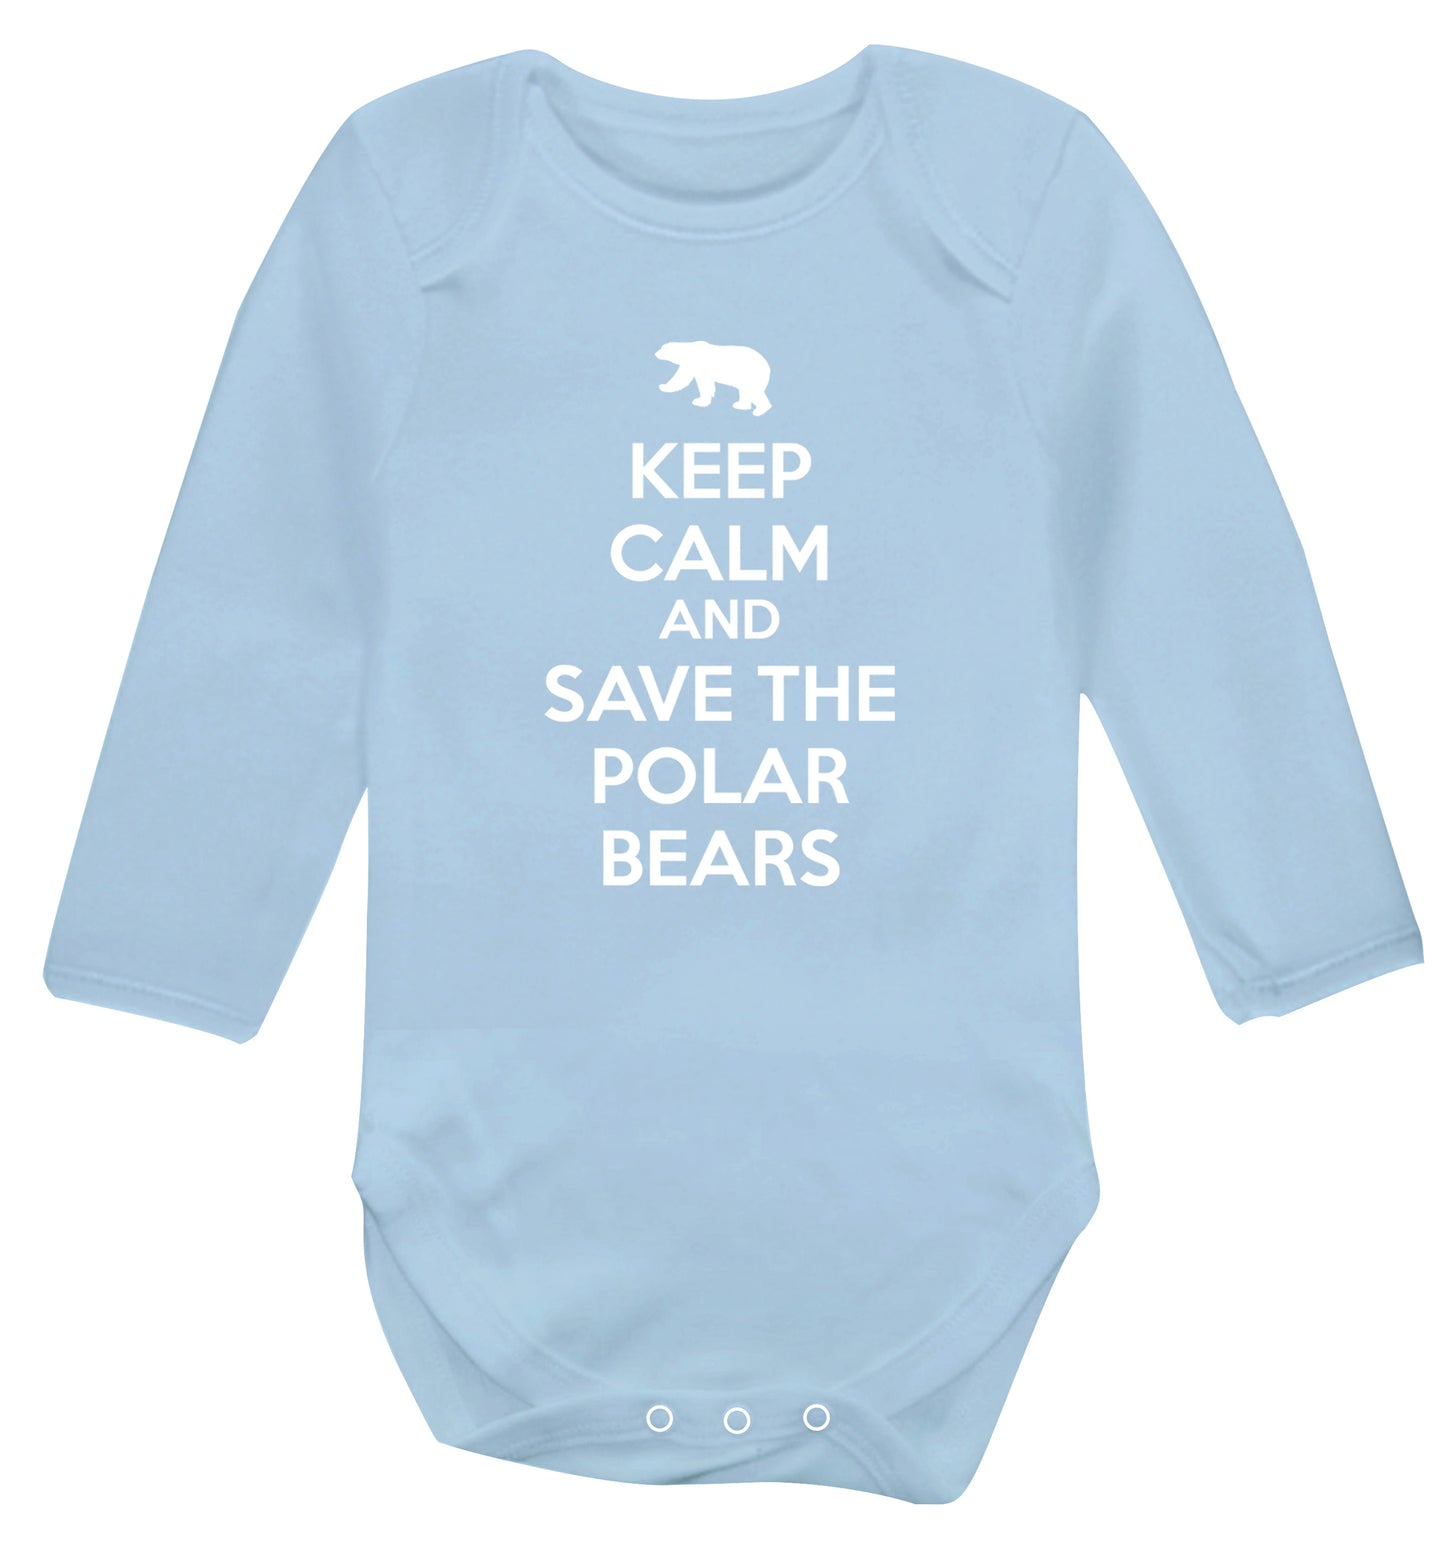 Keep calm and save the polar bears Baby Vest long sleeved pale blue 6-12 months